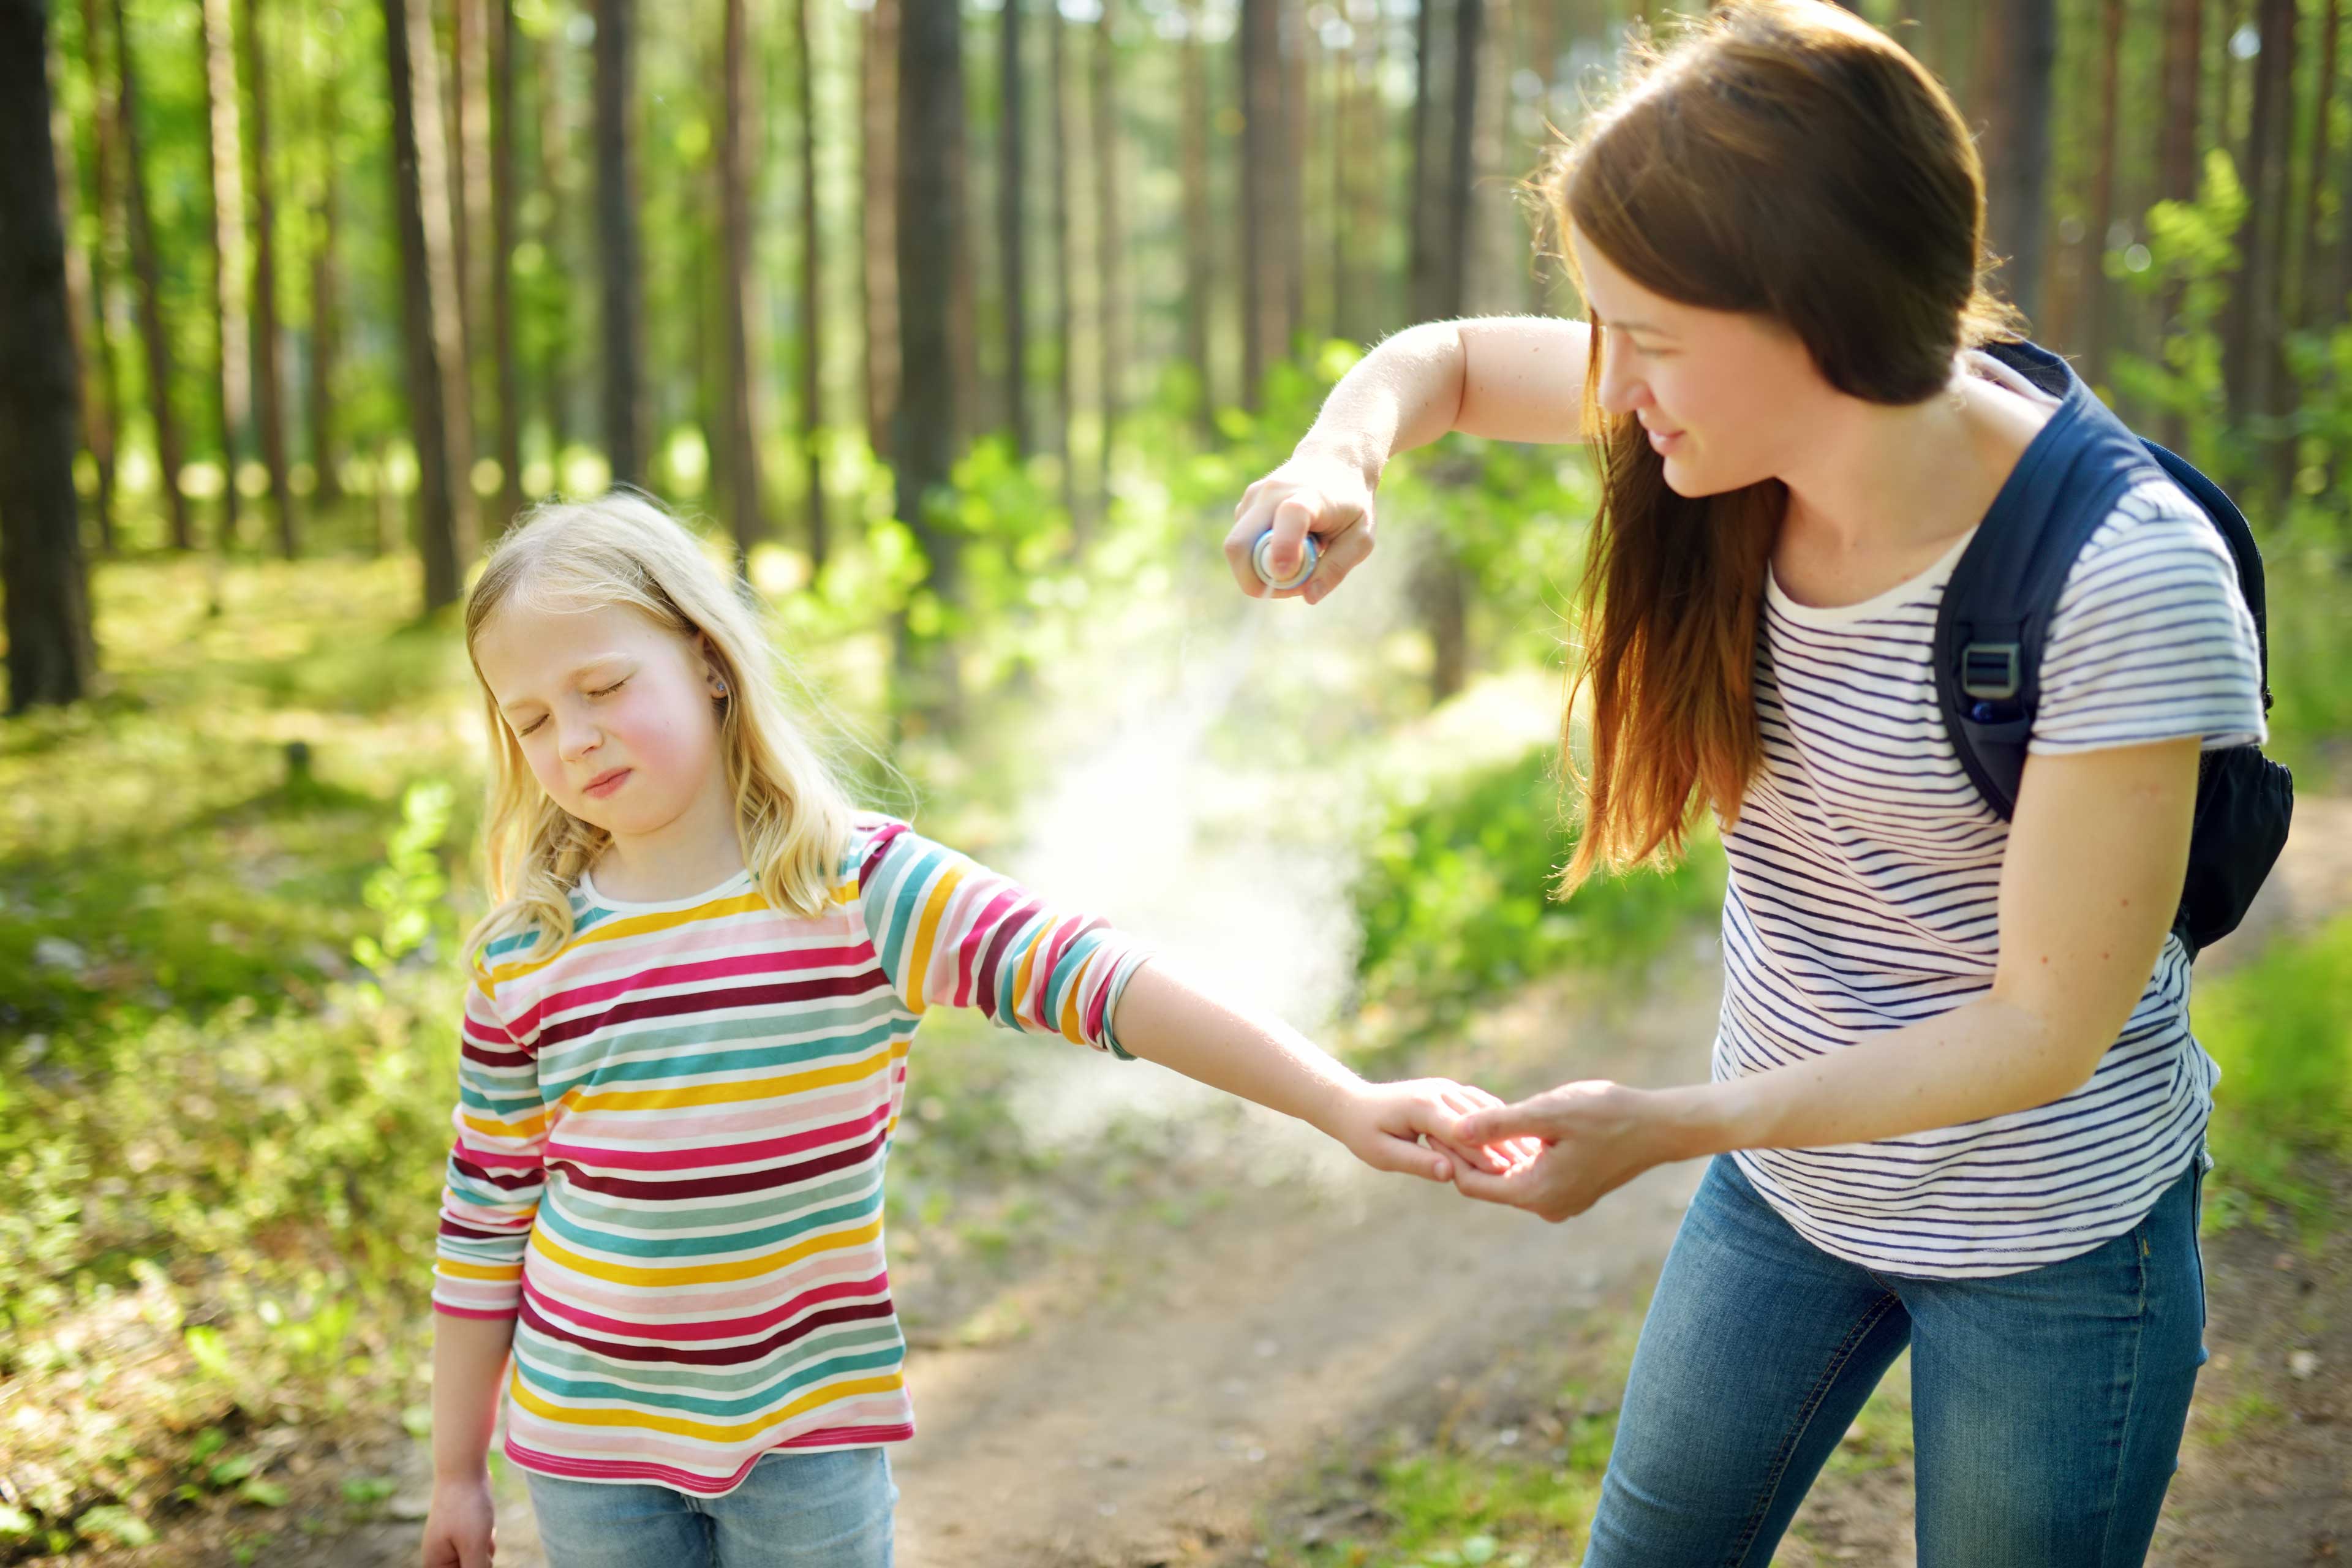 A woman spraying bug spray on a girl in the woods.